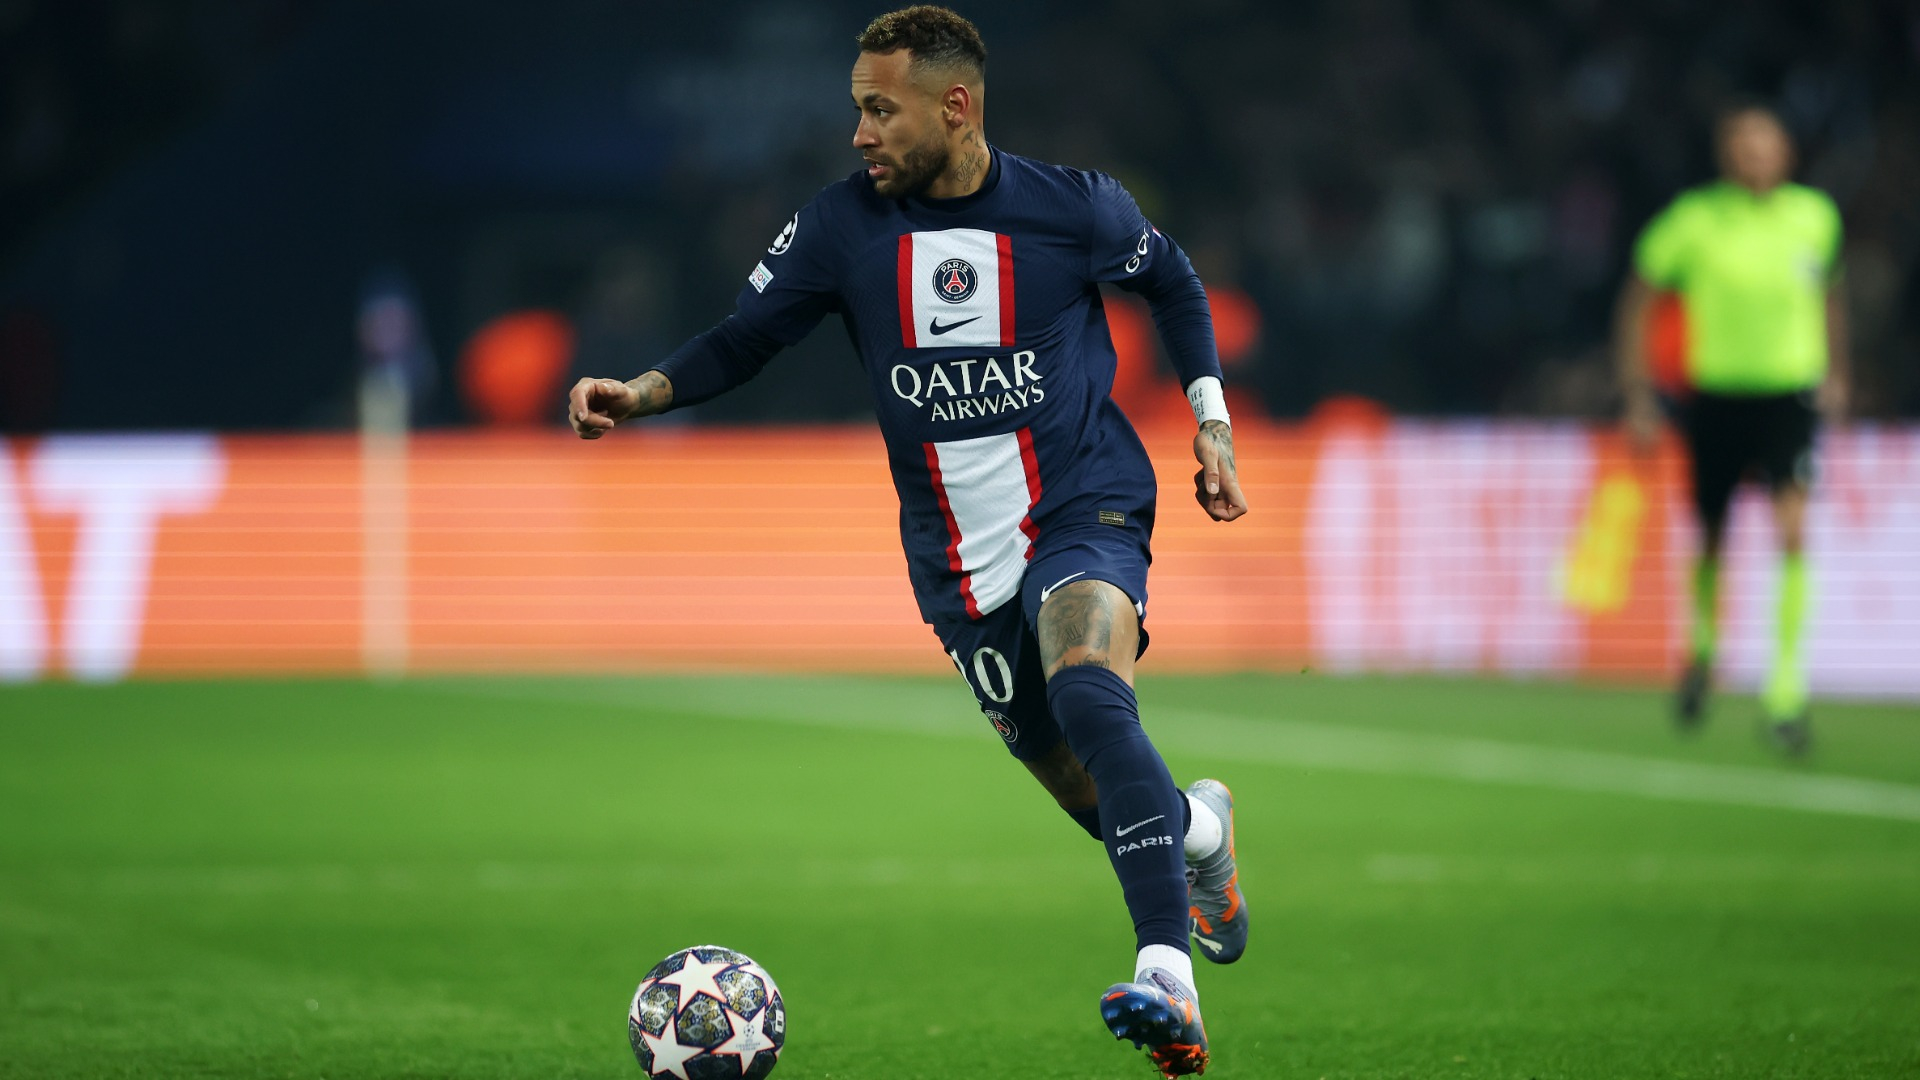 Neymar May Return To Barcelona After Dembele's Transfer To PSG